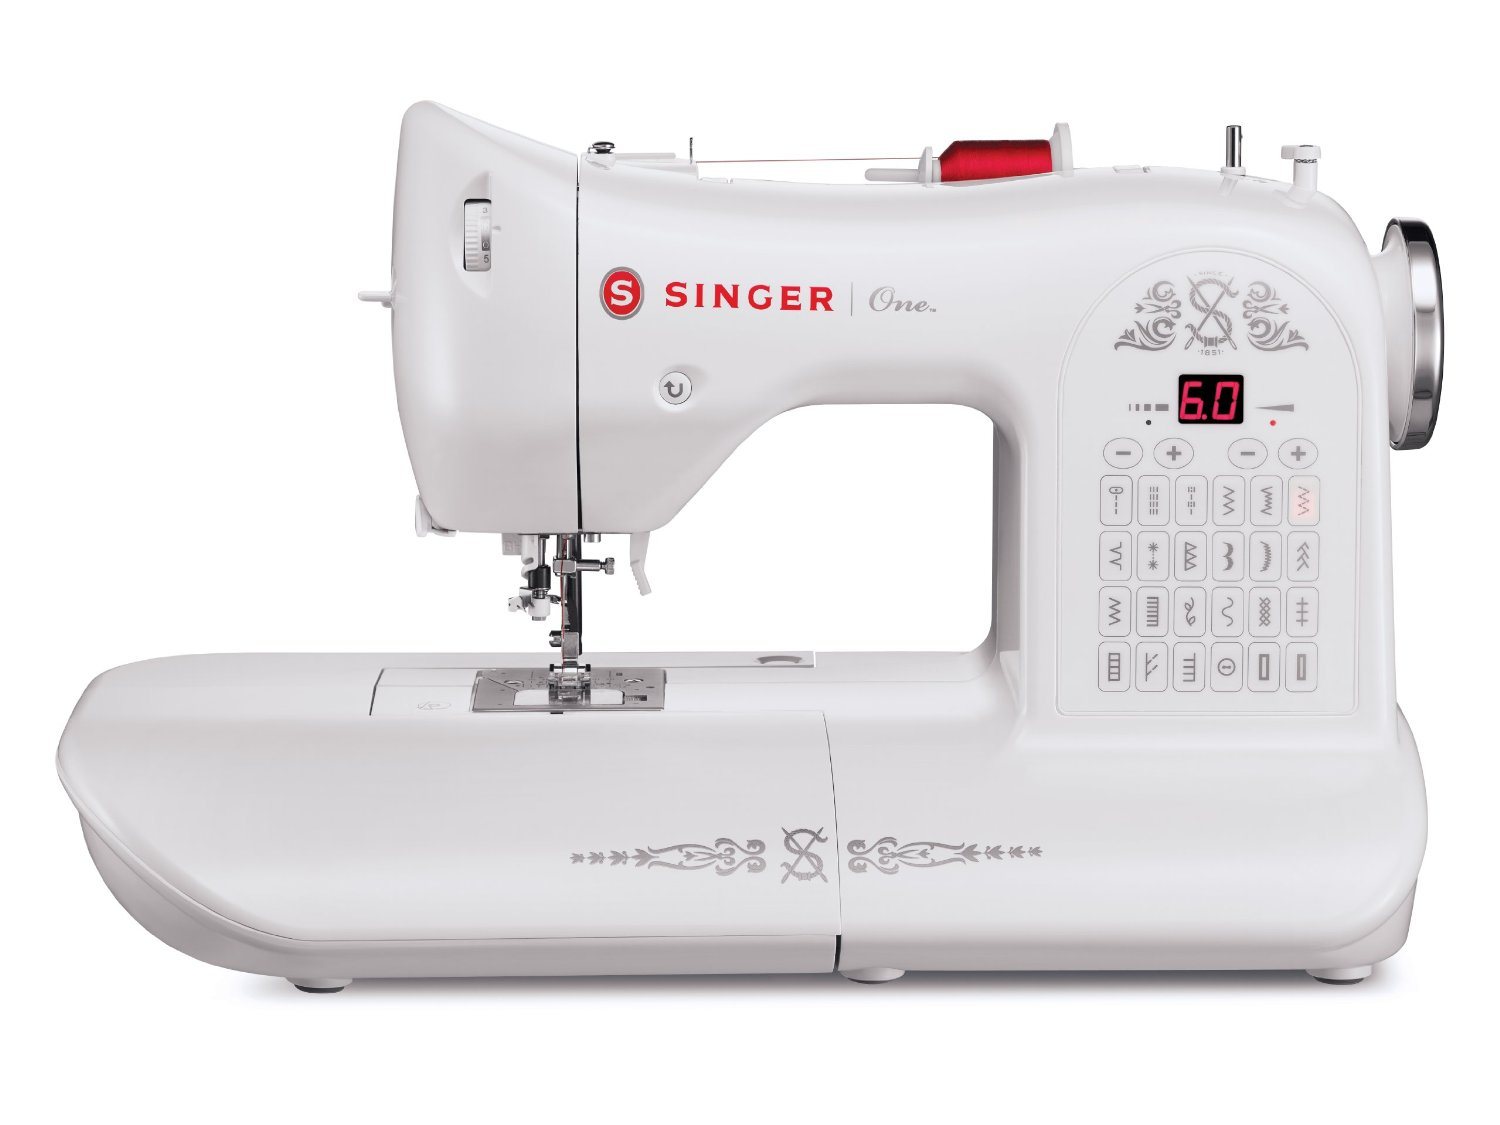 singer one review 